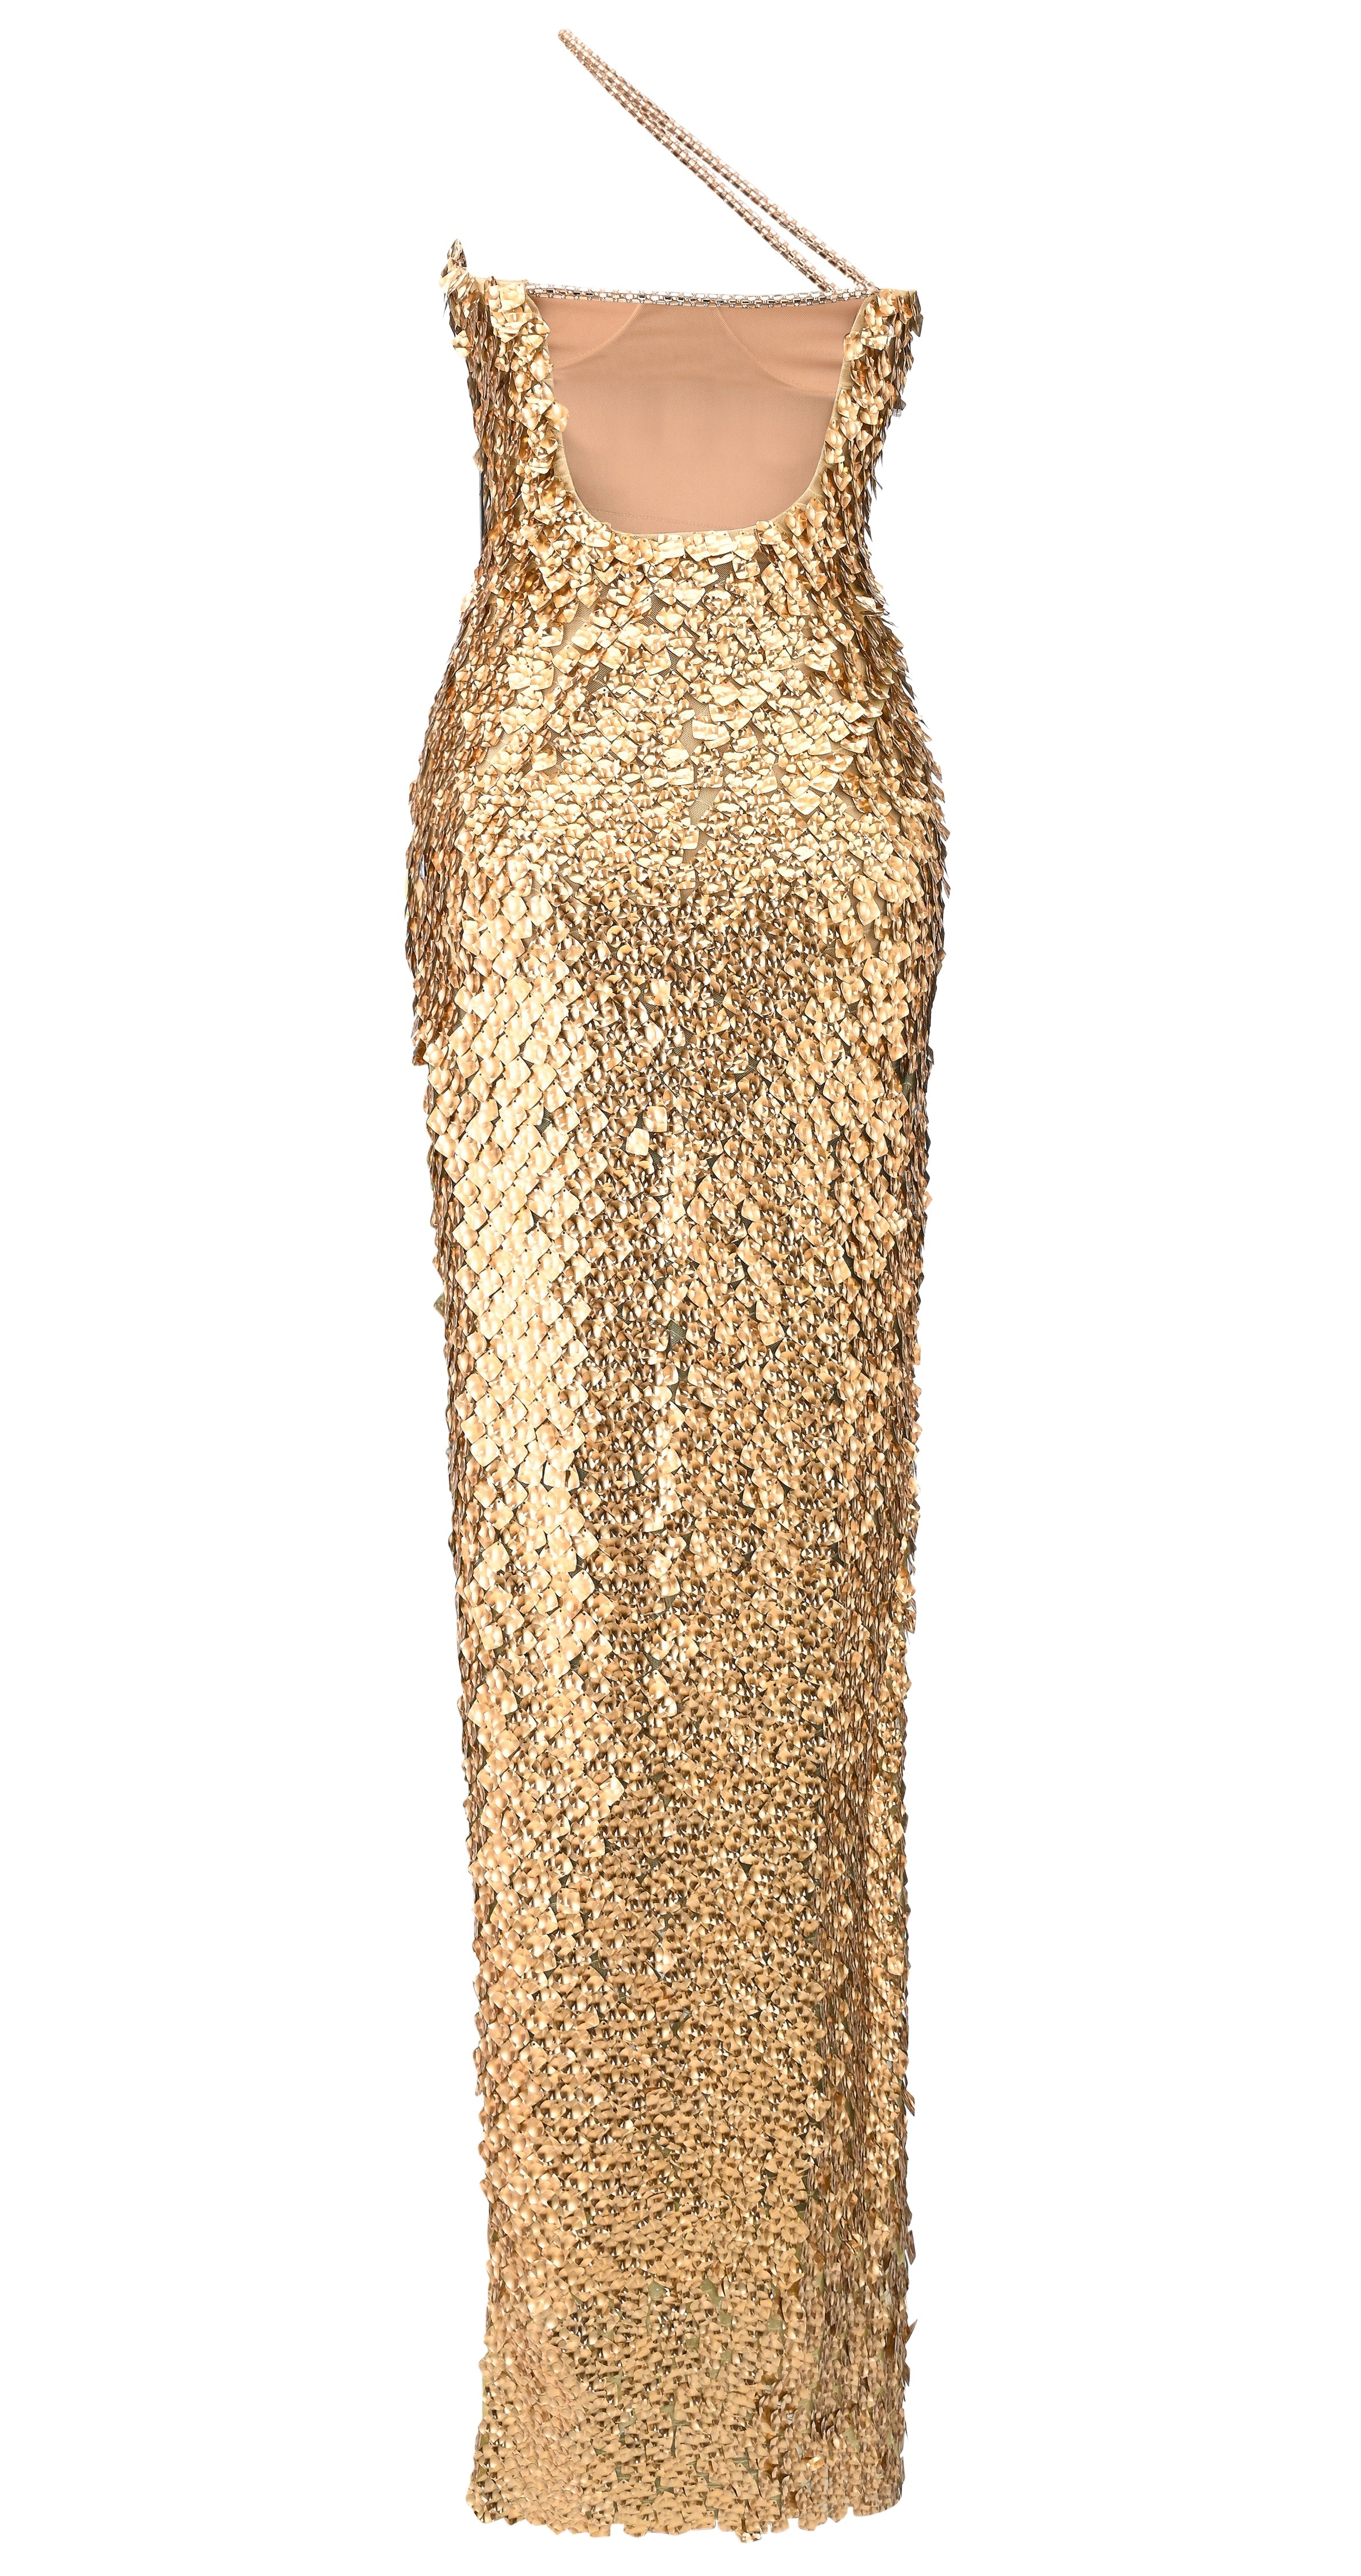 GOLD SEQUINED COCKTAIL DRESS